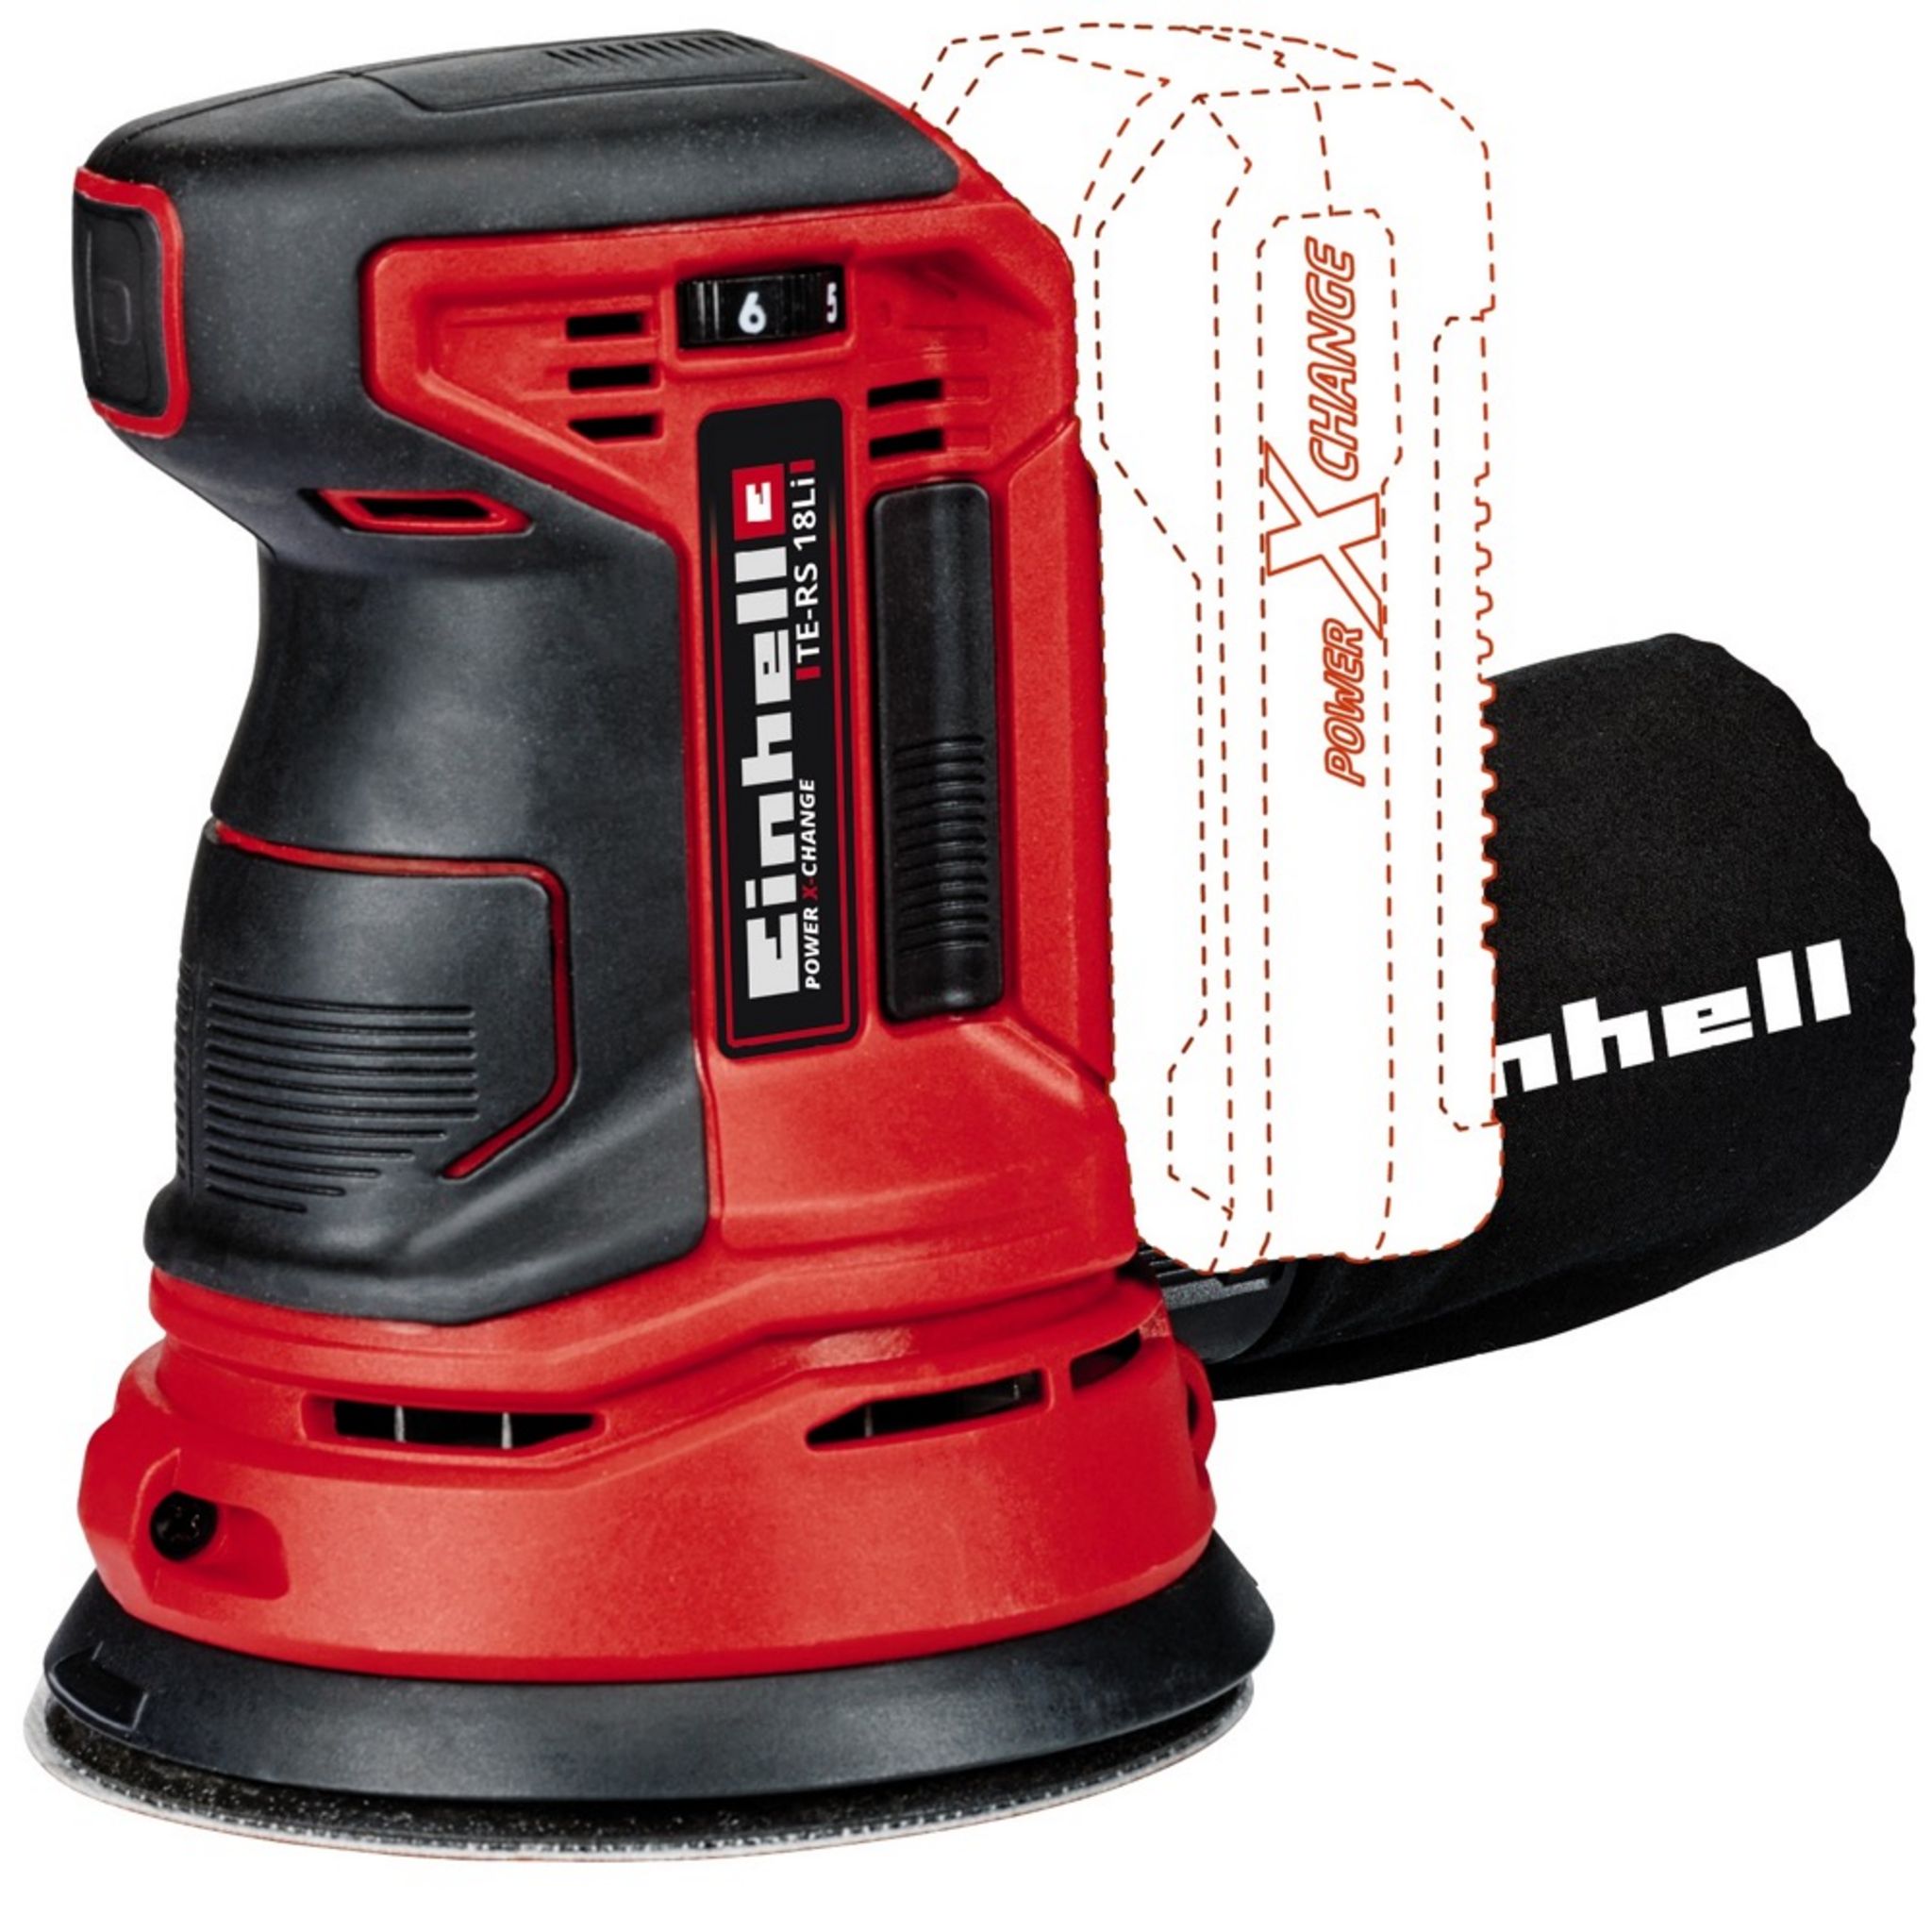 Einhell Ponceuse TE-OS 18/150 Rouge